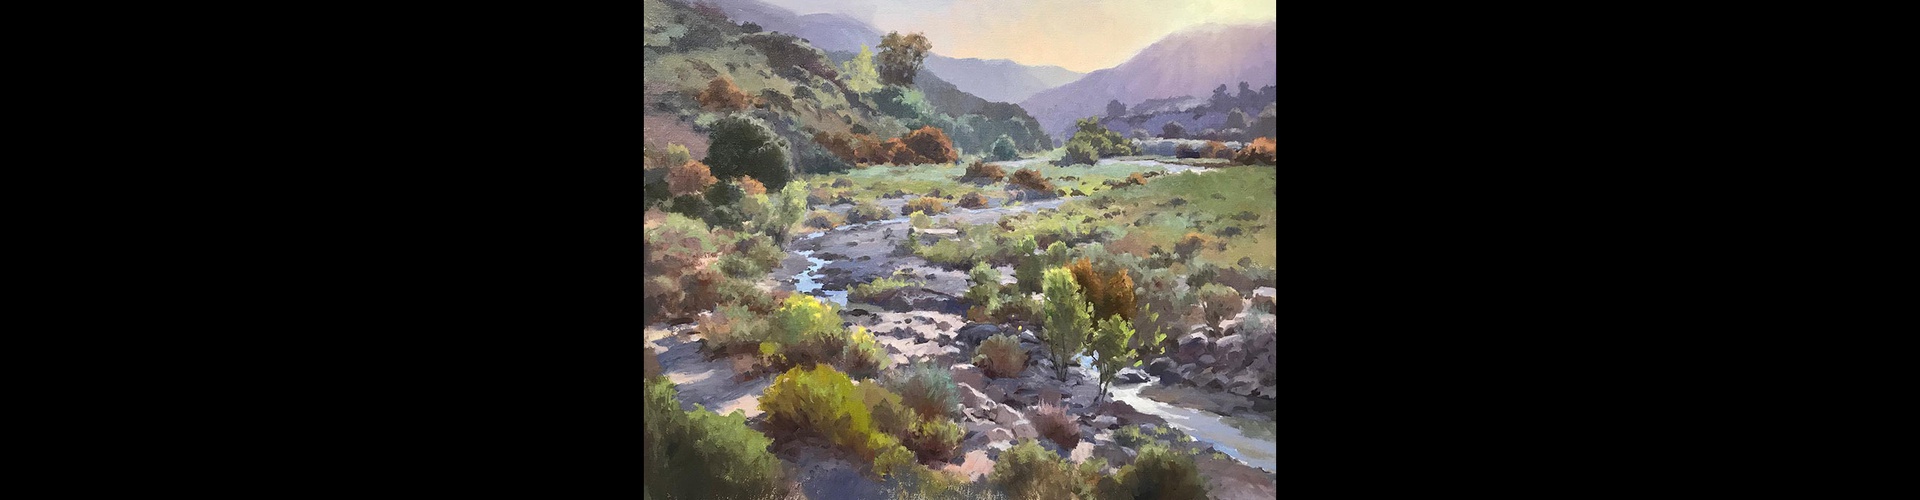 Gallery of Landscape Painting by John Cosby-USA